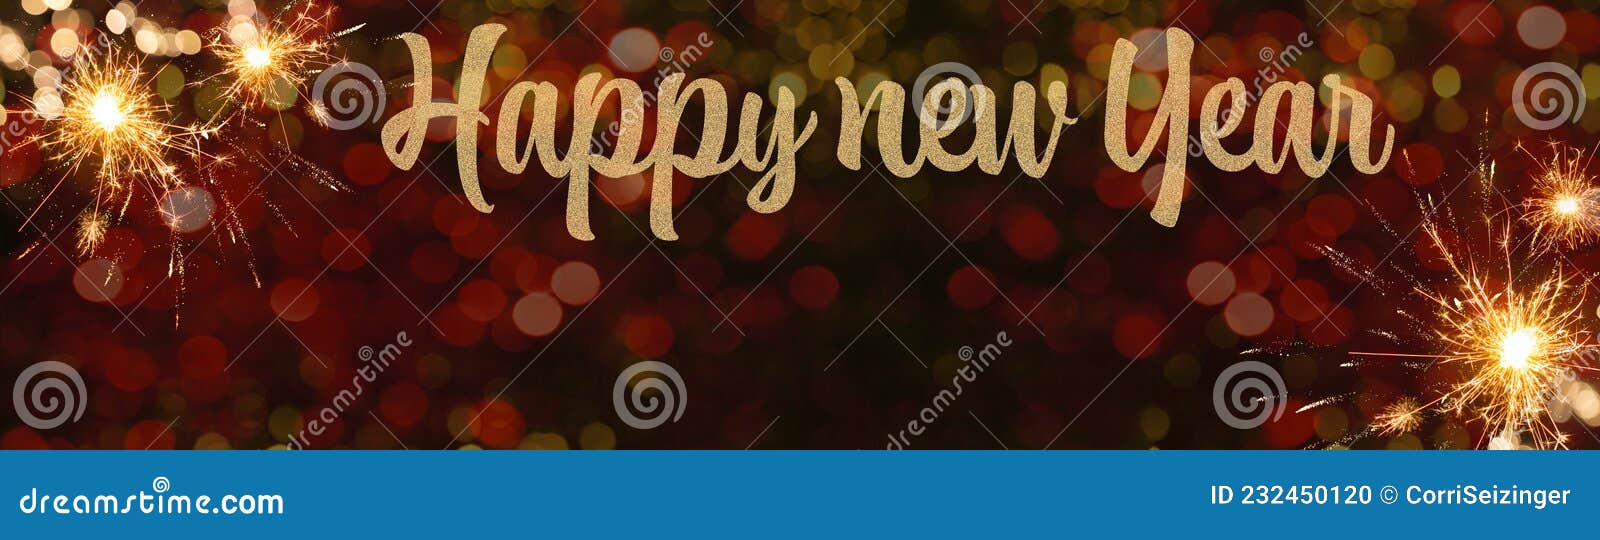 HAPPY NEW YEAR 2022 - Festive Silvester Background Panorama Greeting Card  Banner Long - Golden Firework and Red Bokeh Light in Stock Photo - Image of  silvester, light: 232450120